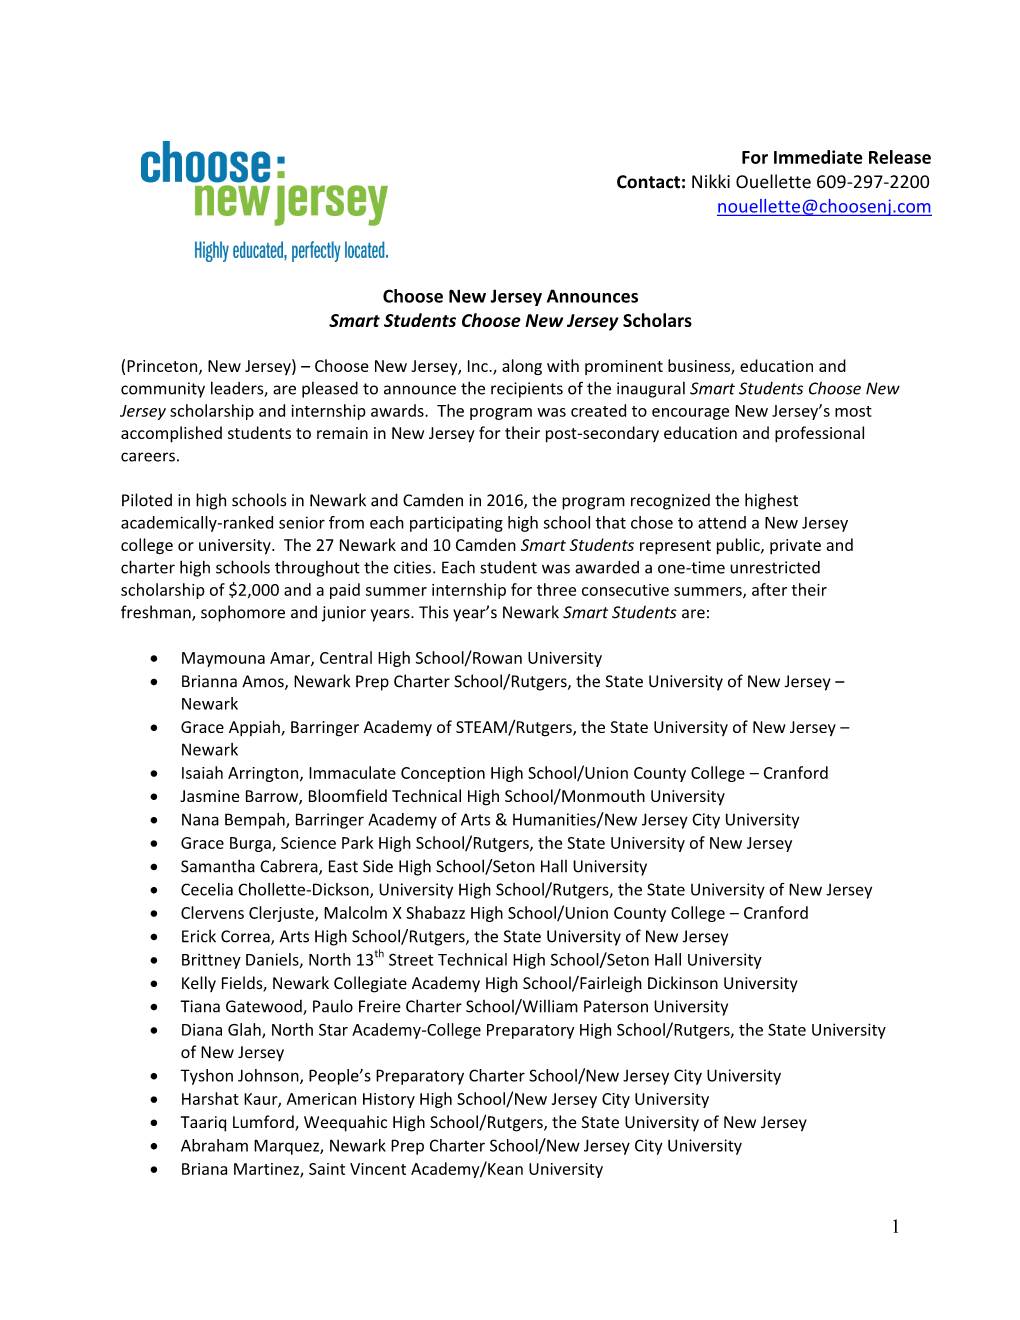 1 Choose New Jersey Announces Smart Students Choose New